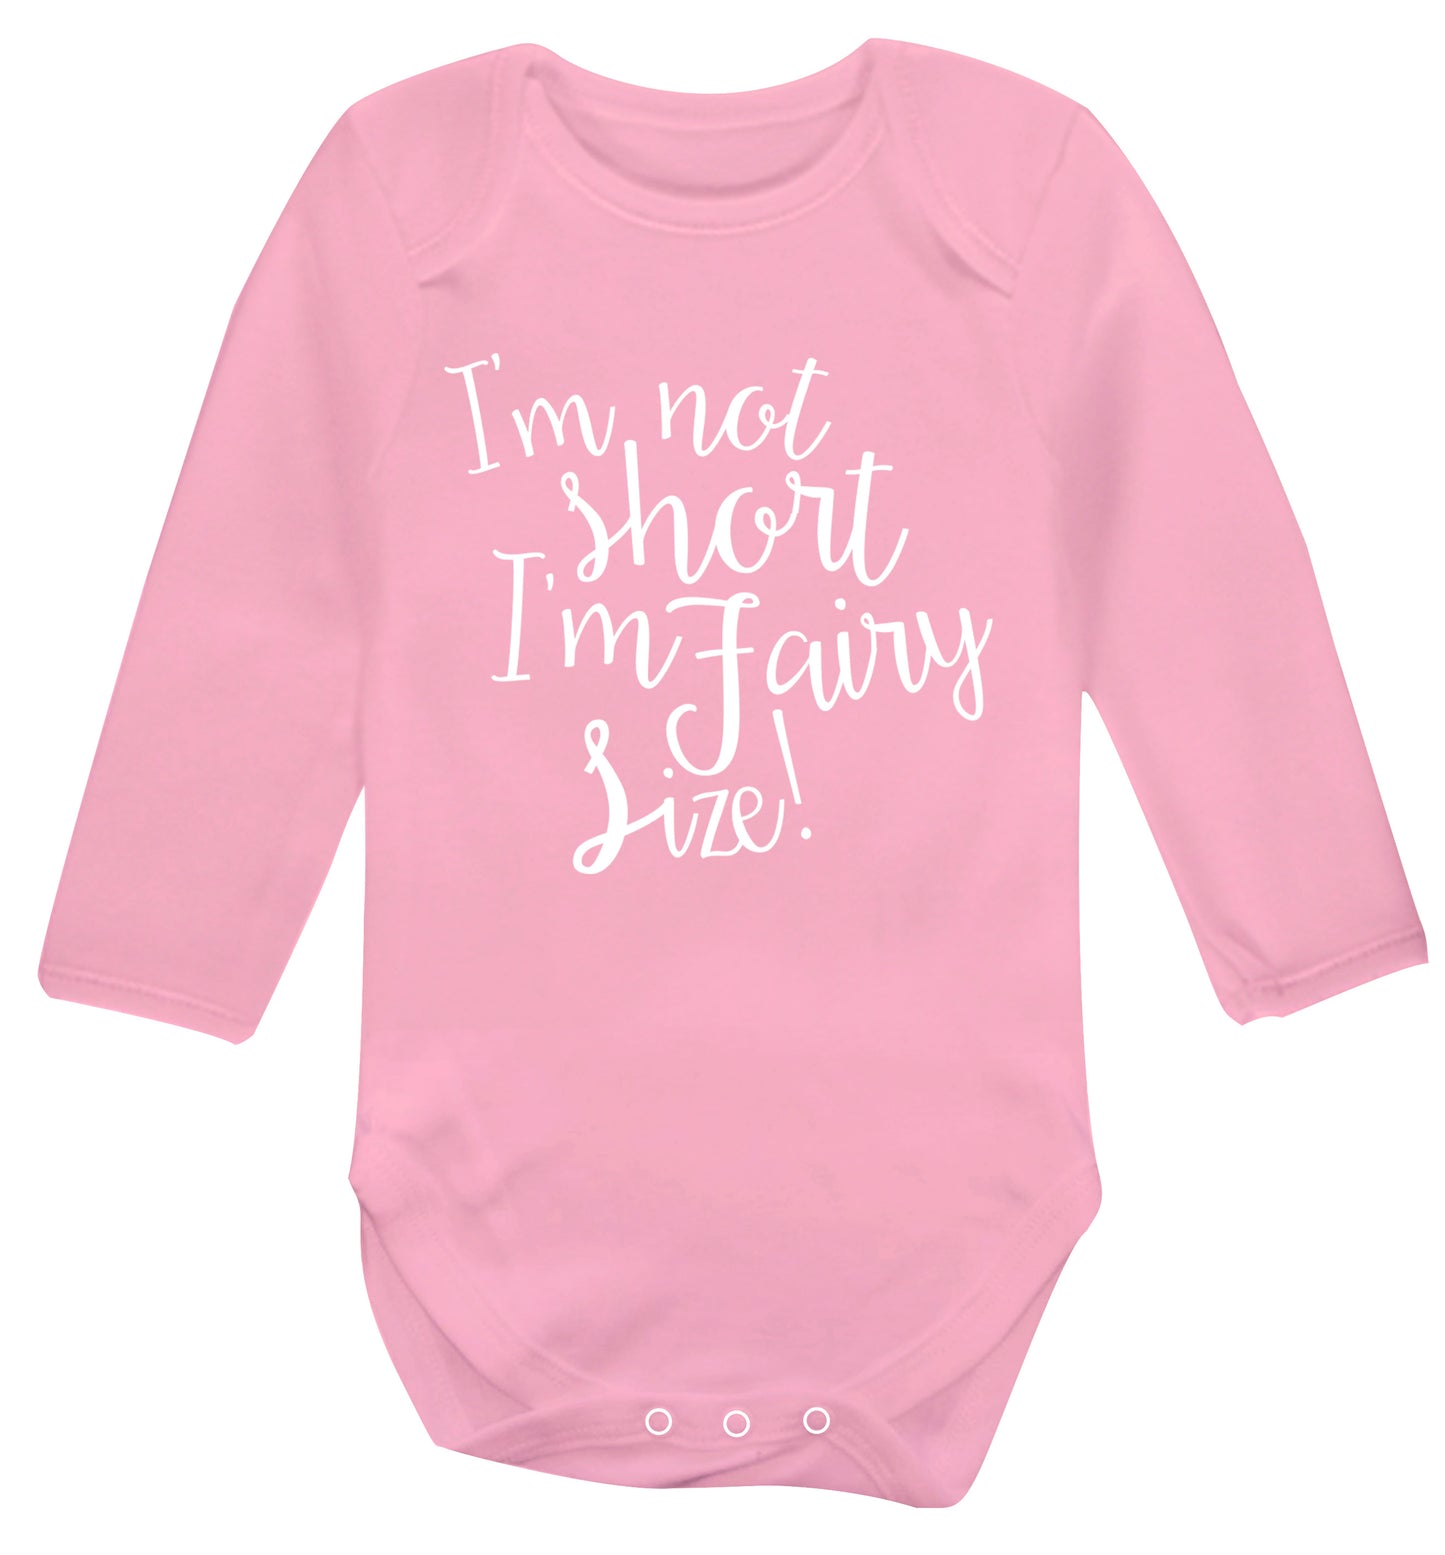 I'm not short I'm fairy sized! Baby Vest long sleeved pale pink 6-12 months